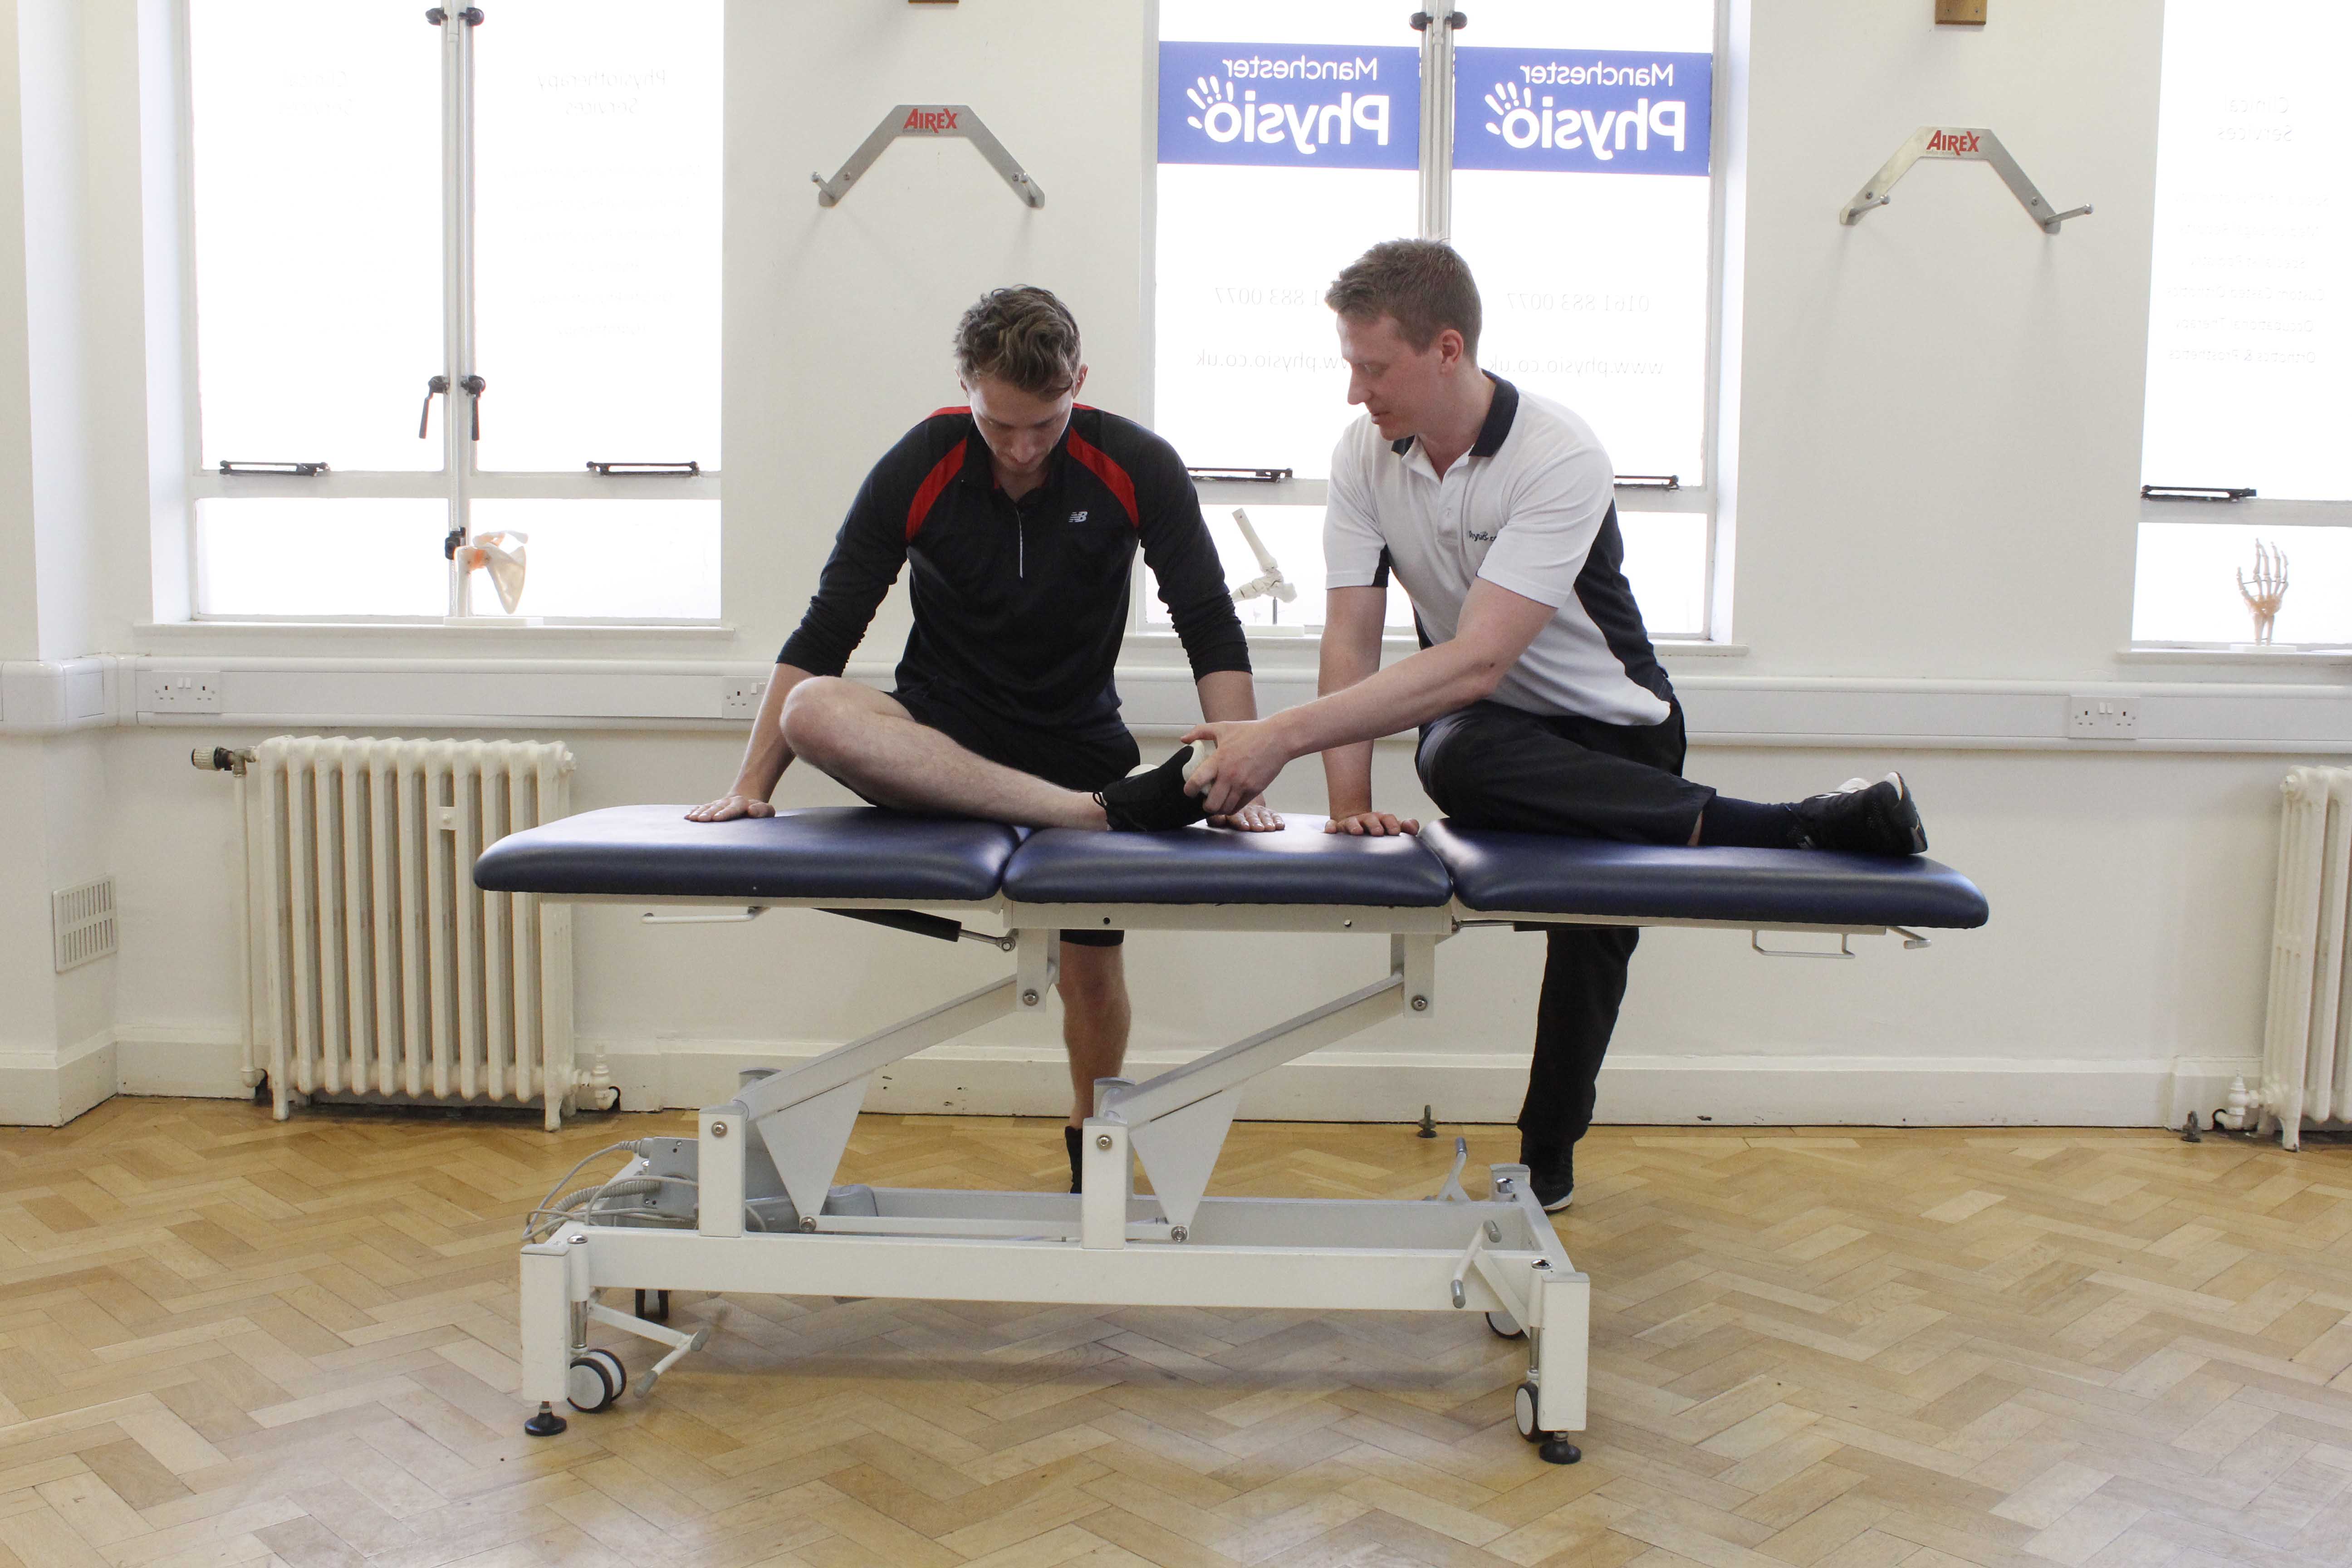 Specialist musculoskeletal Physiotherapist supervising hip and knee stretches for sports rehabilitation